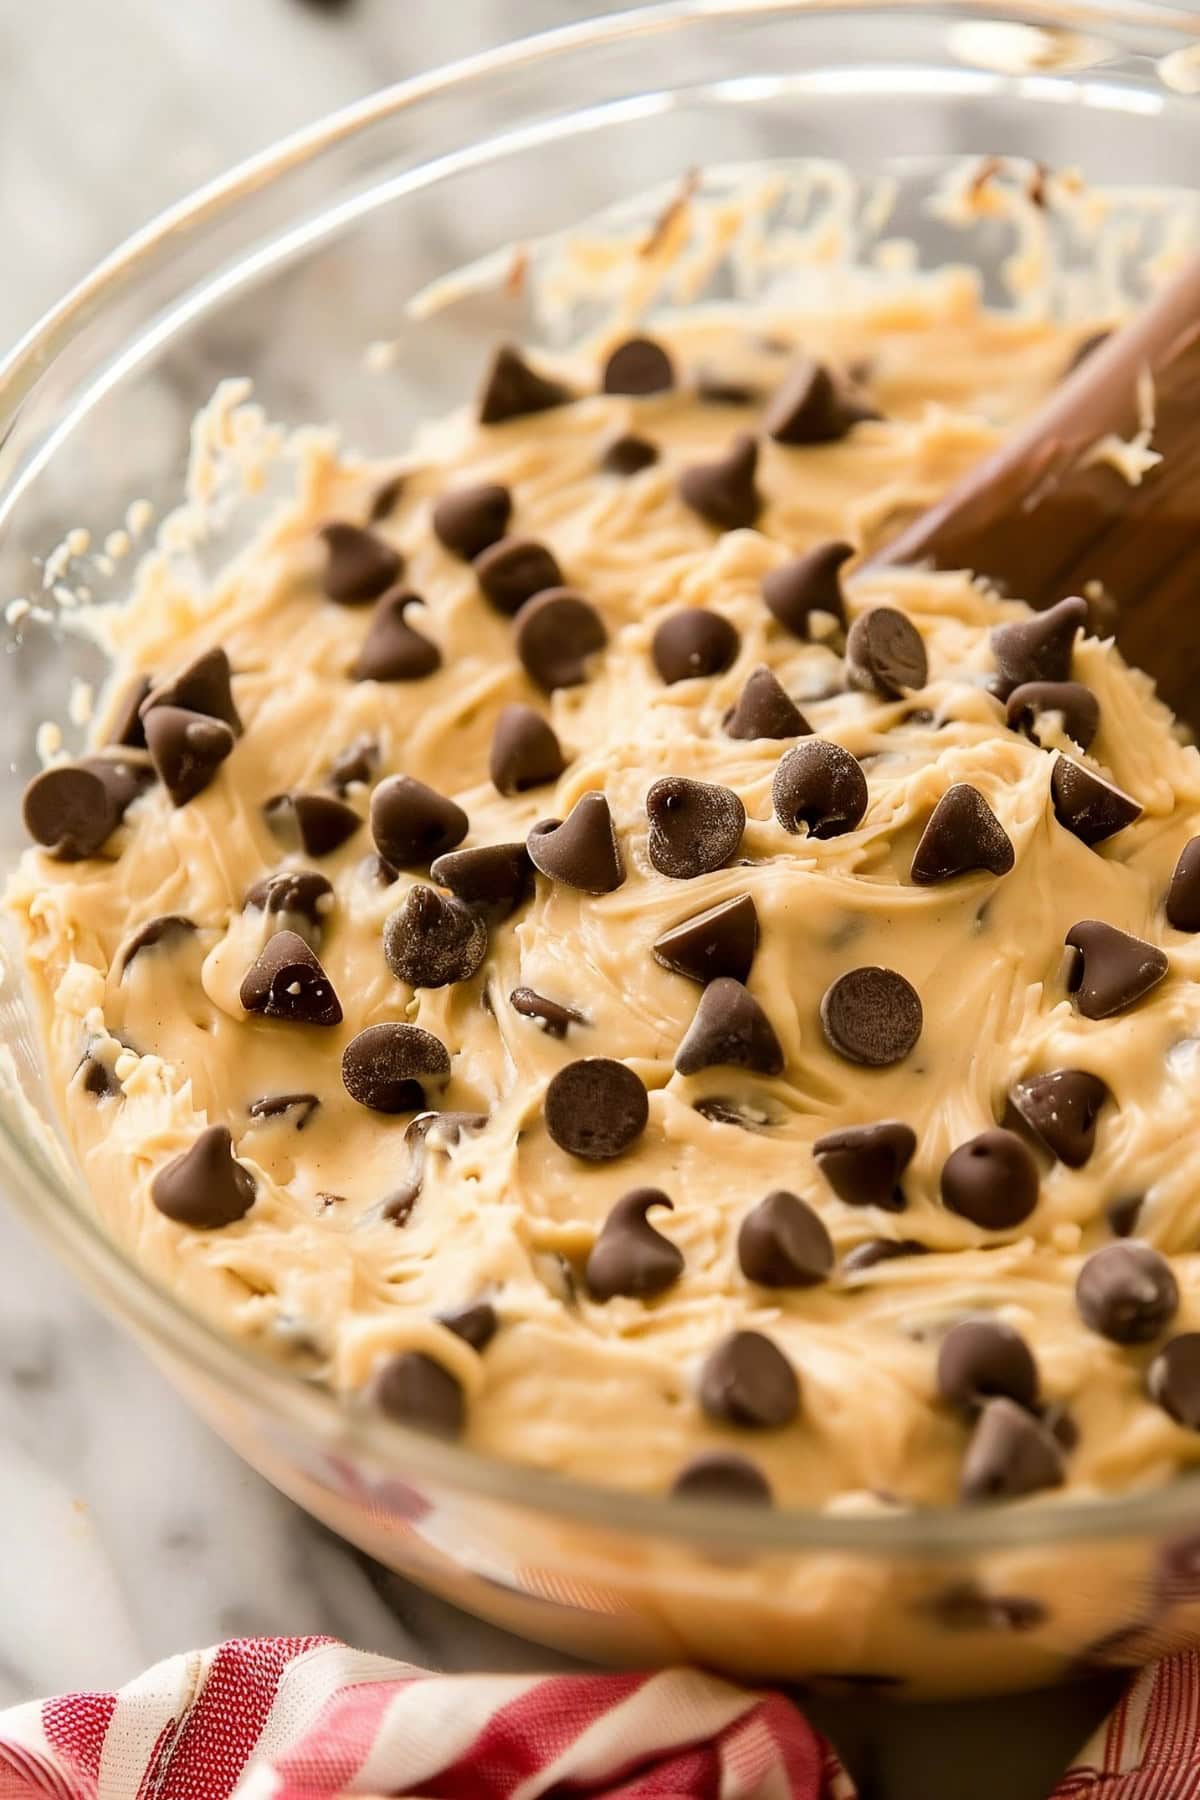 A glass bowl of chocolate chip cookie dough with a wooden spoon